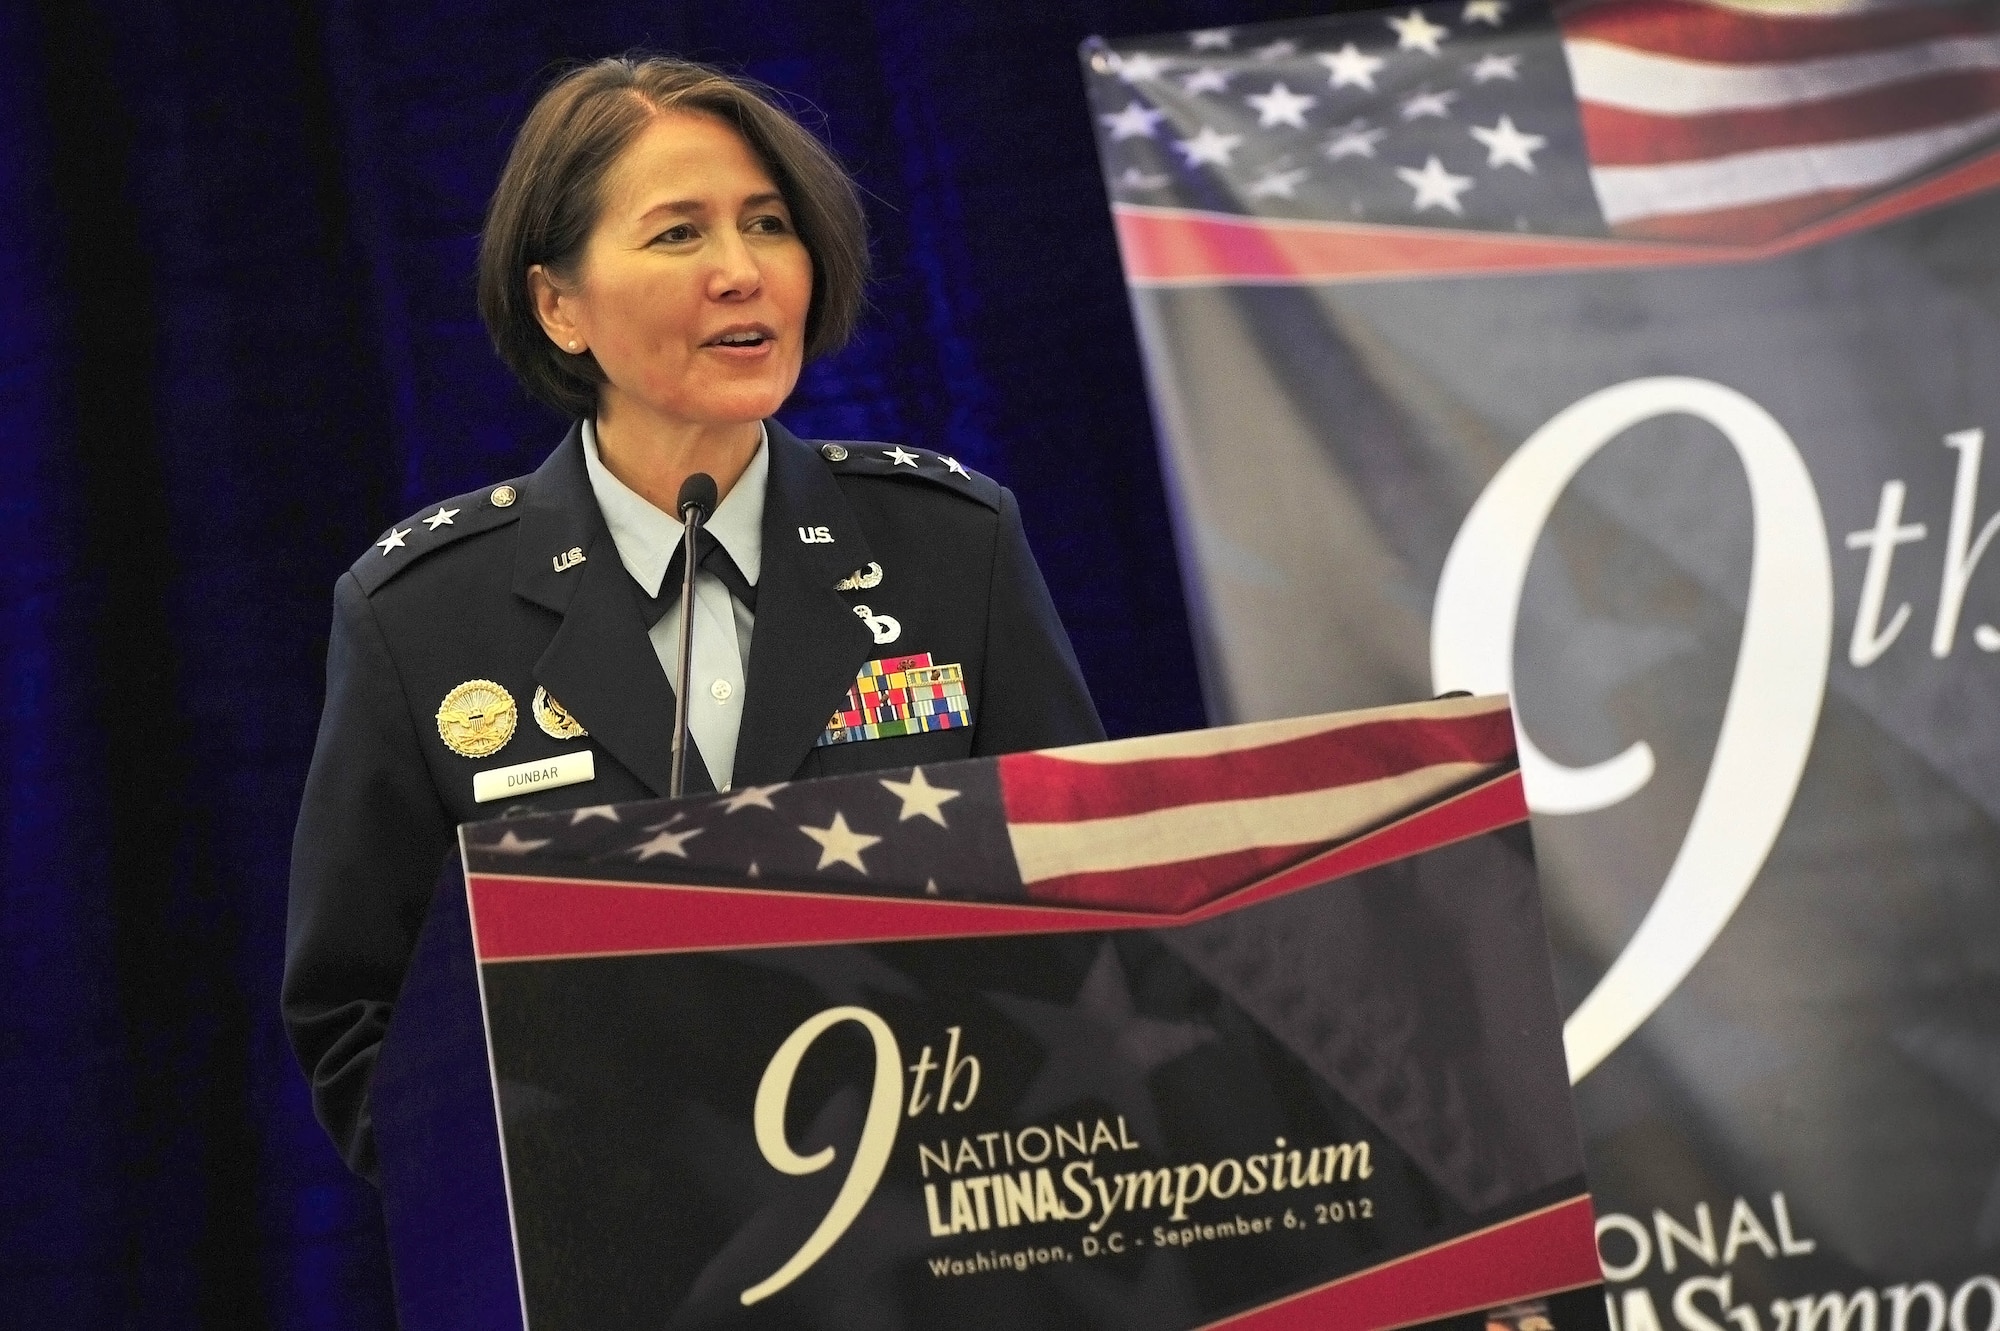 9th Annual Latina Symposium Inspires And Recognizes Excellence Air